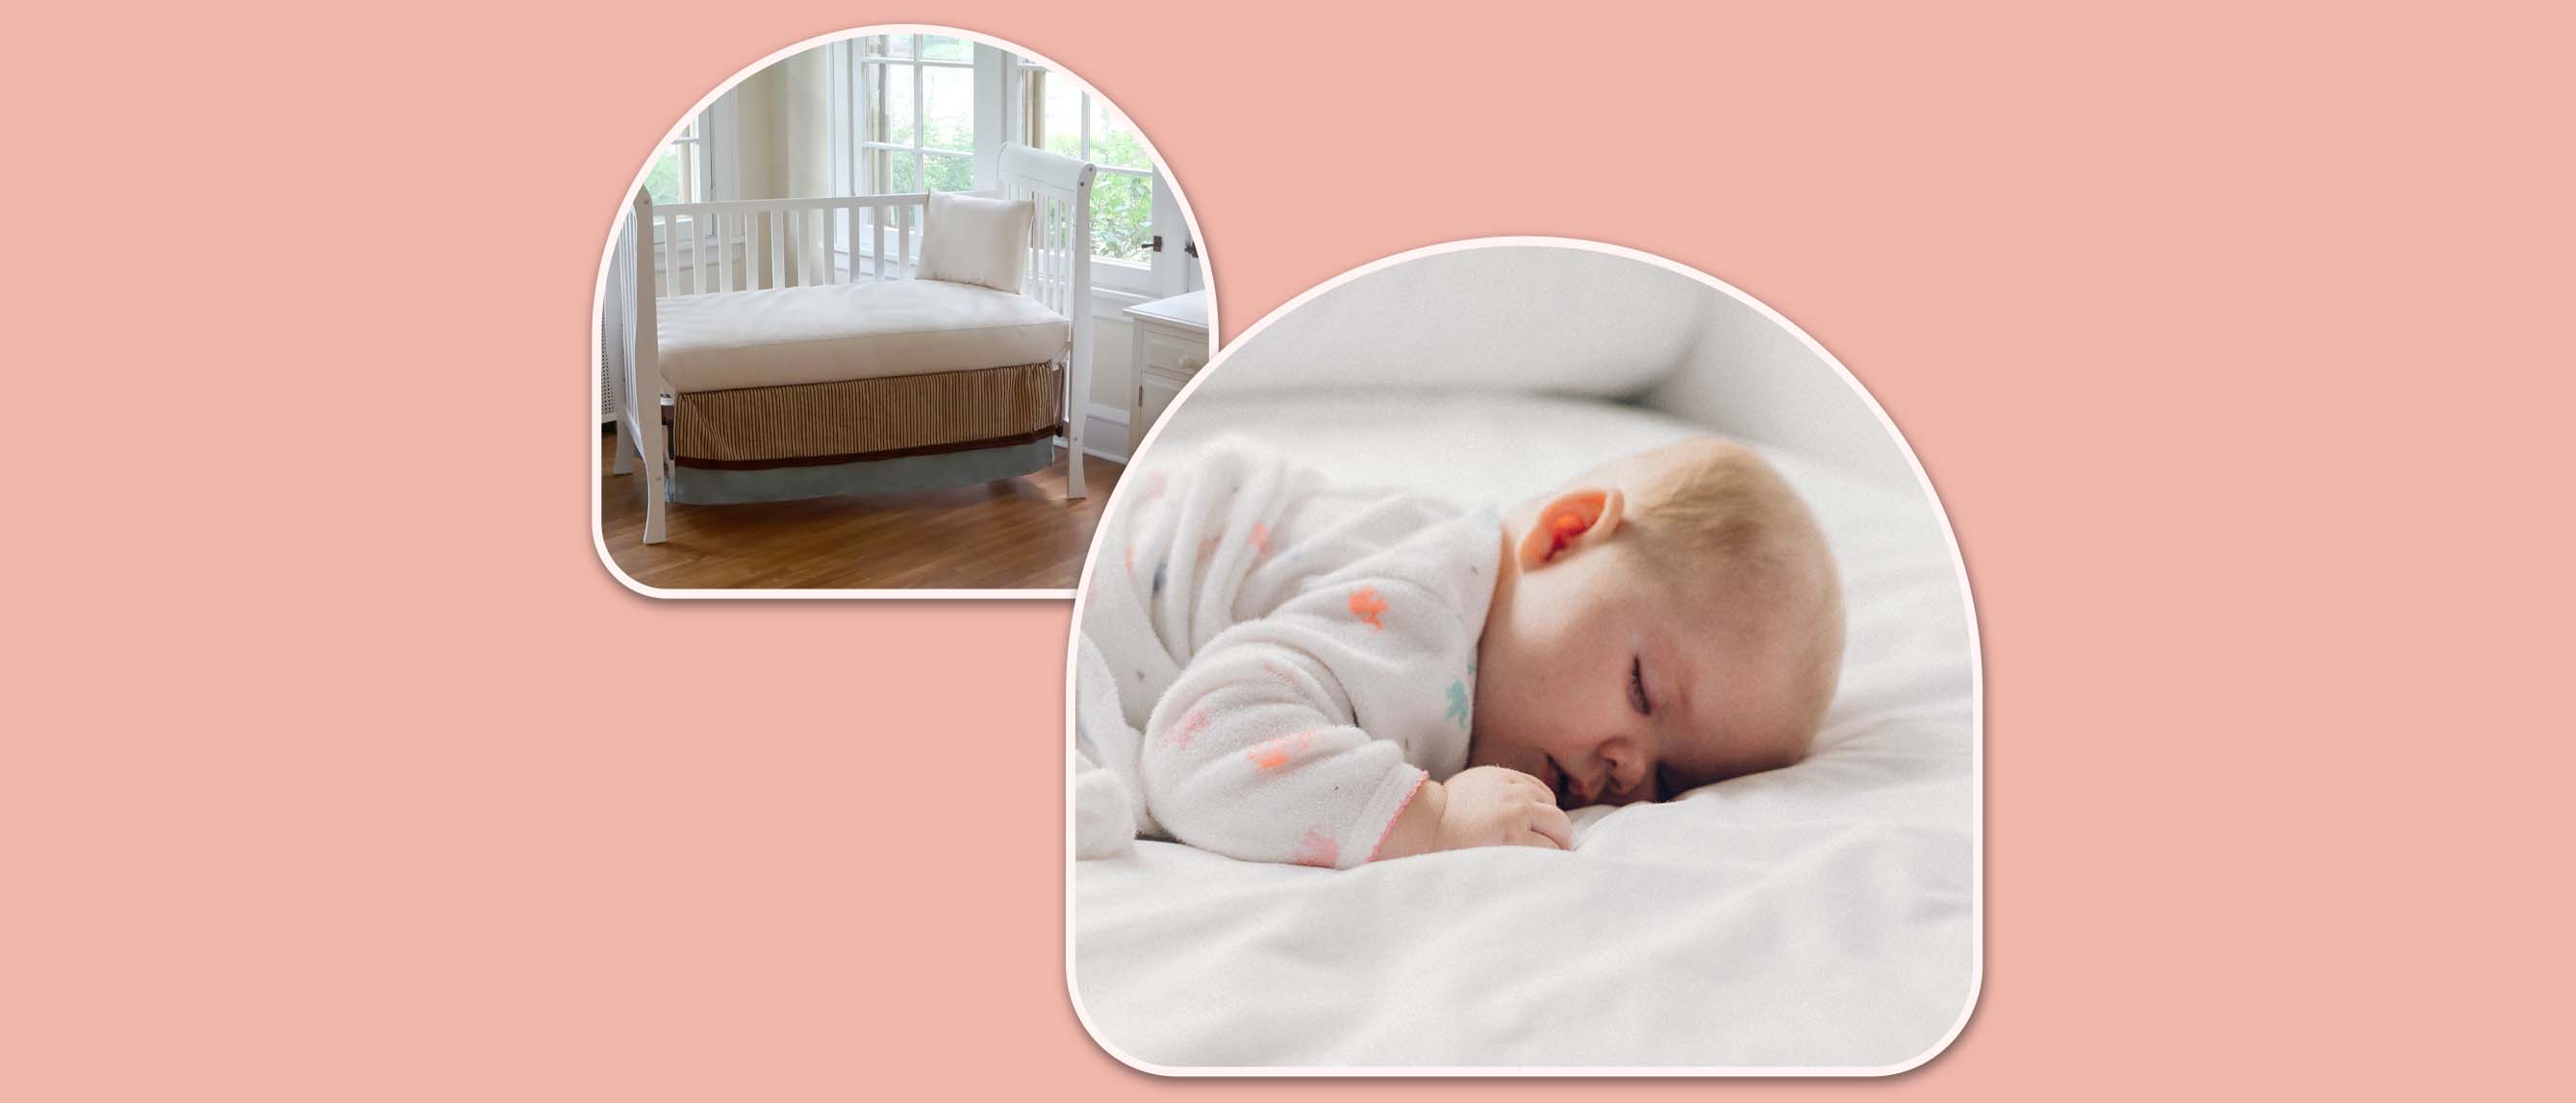 picture of a baby sleeping and crib in two different shapes